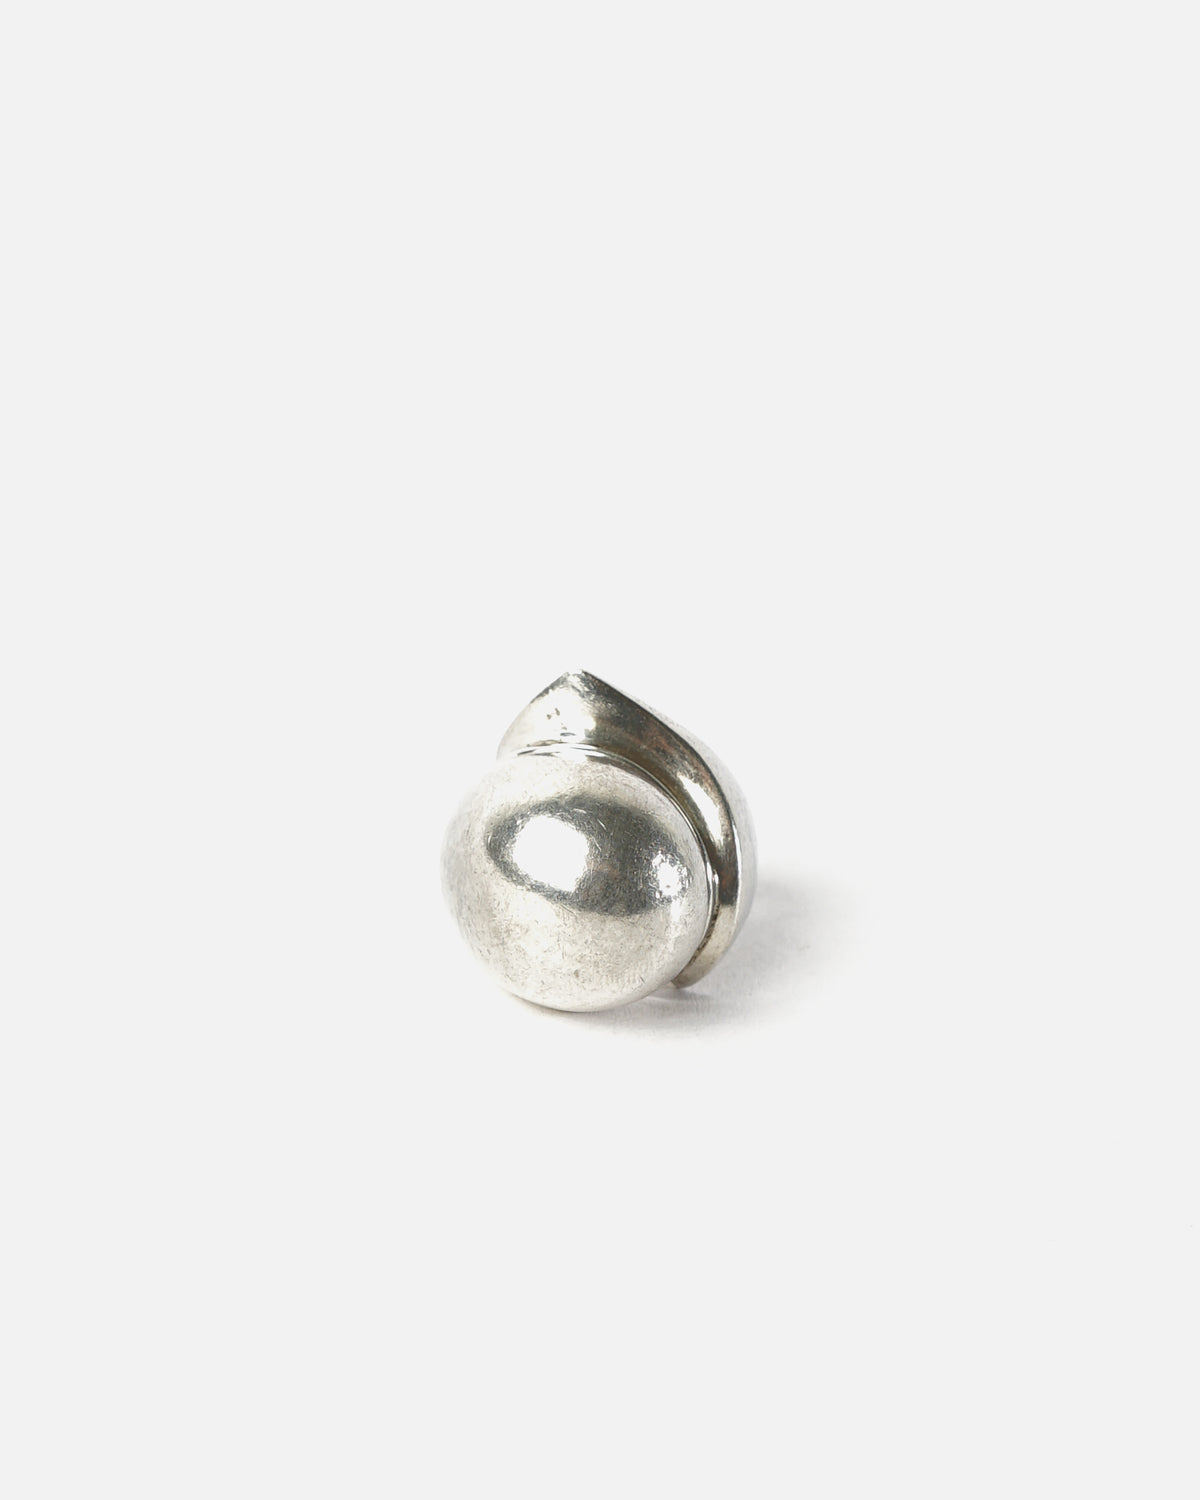 Silver Ring / size: 8.5